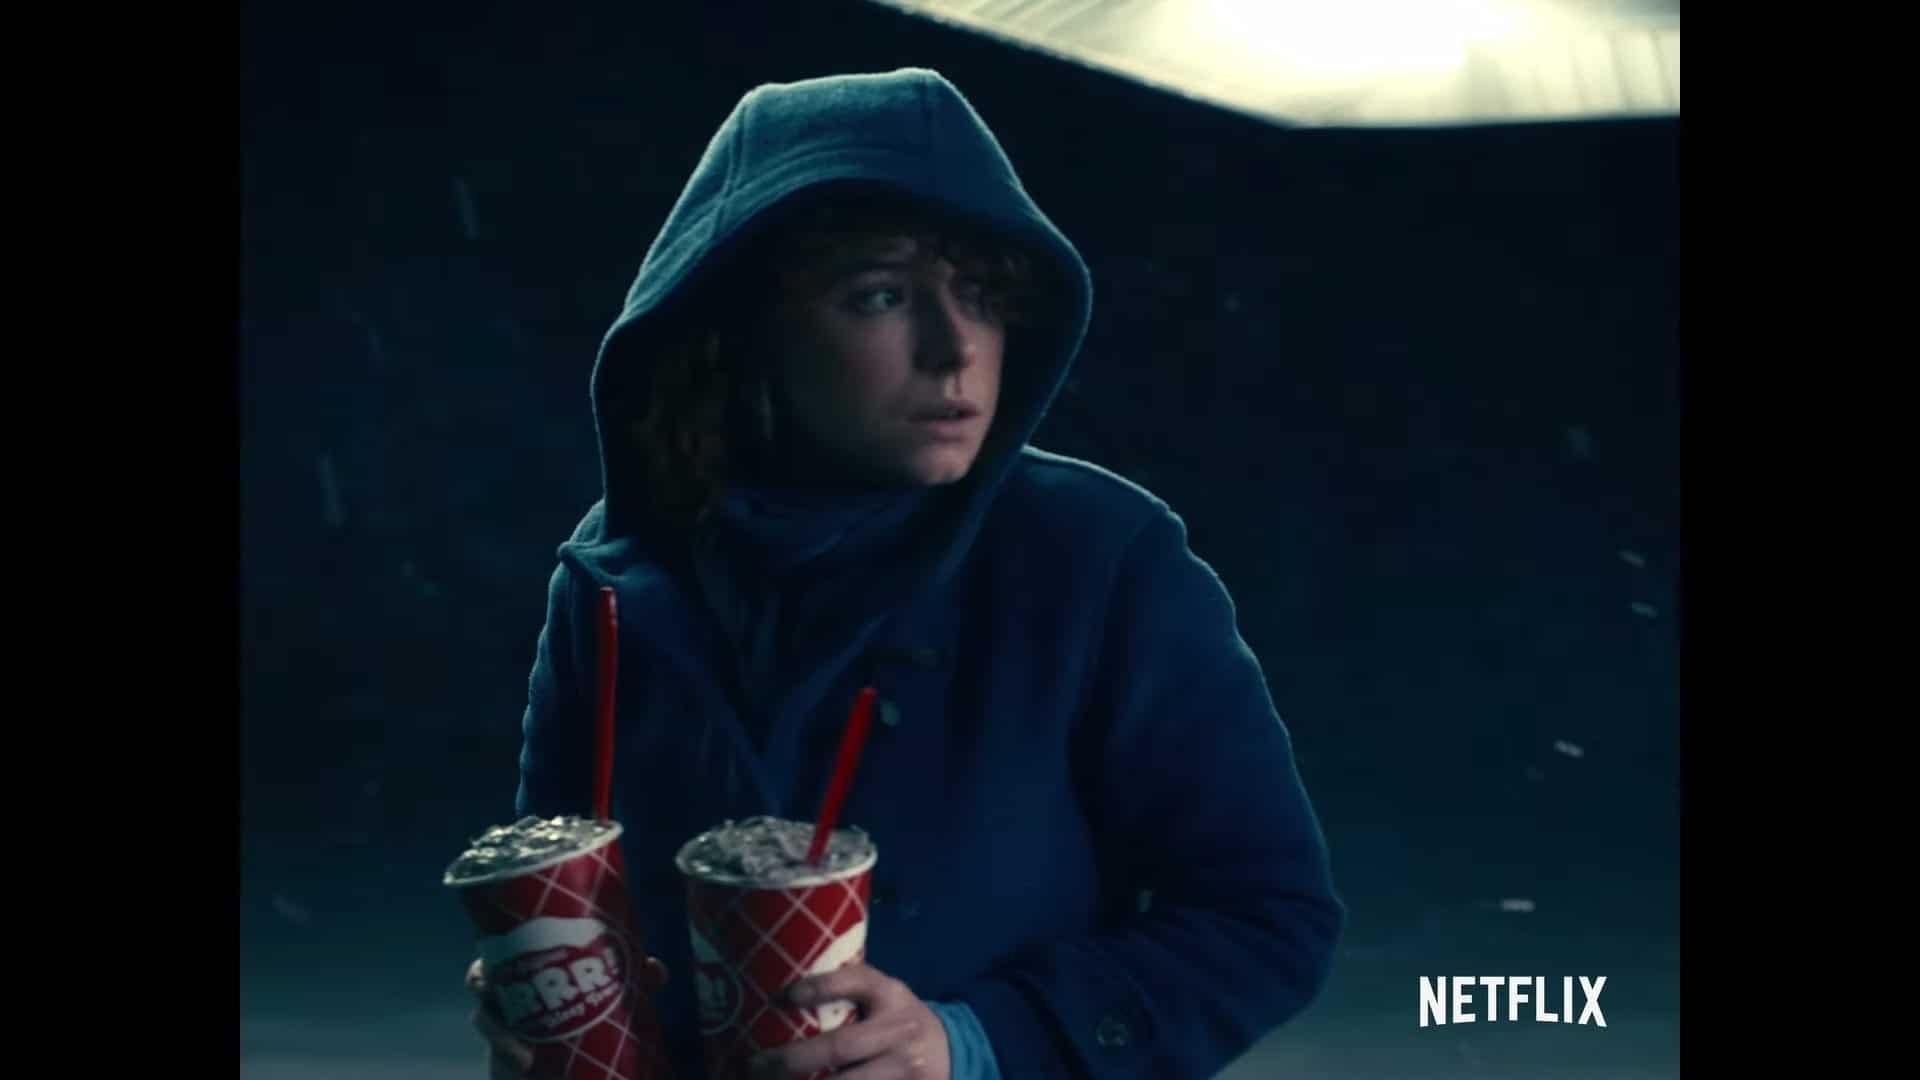 Netflix i'm thinking of ending things Trailer, Netflix Drama Movies, Netflix Horror Movies, Coming to Netflix in September 2020